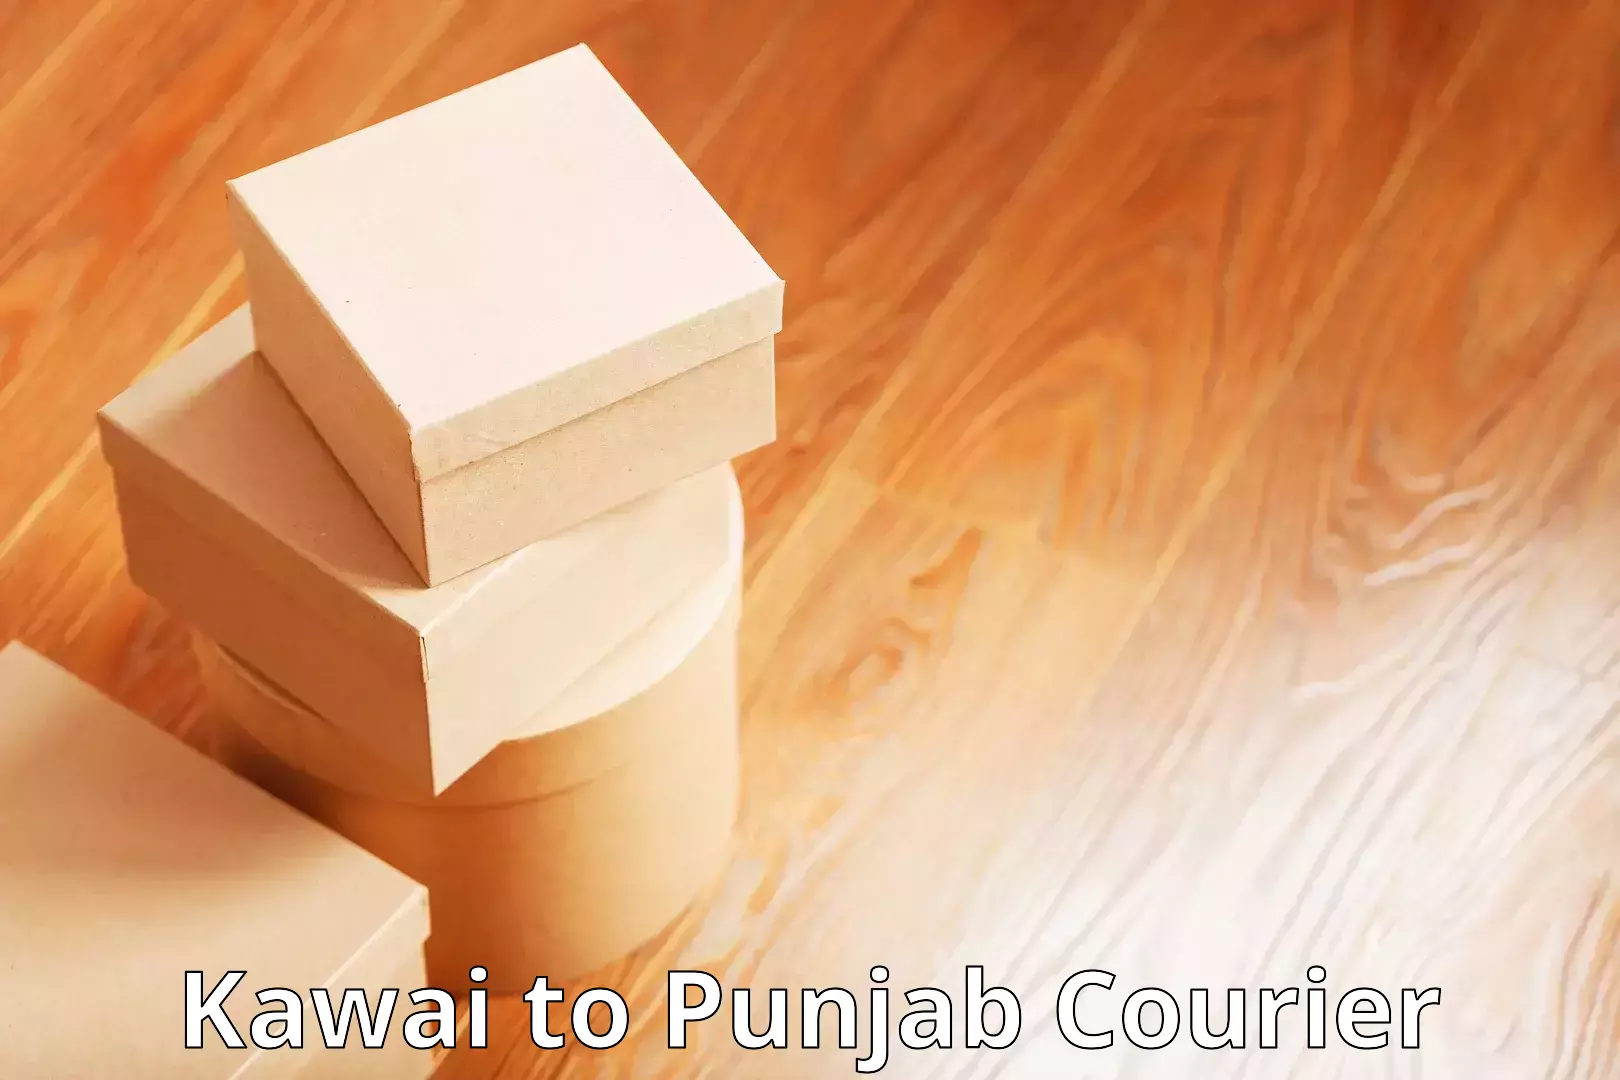 Cash on delivery service Kawai to Punjab